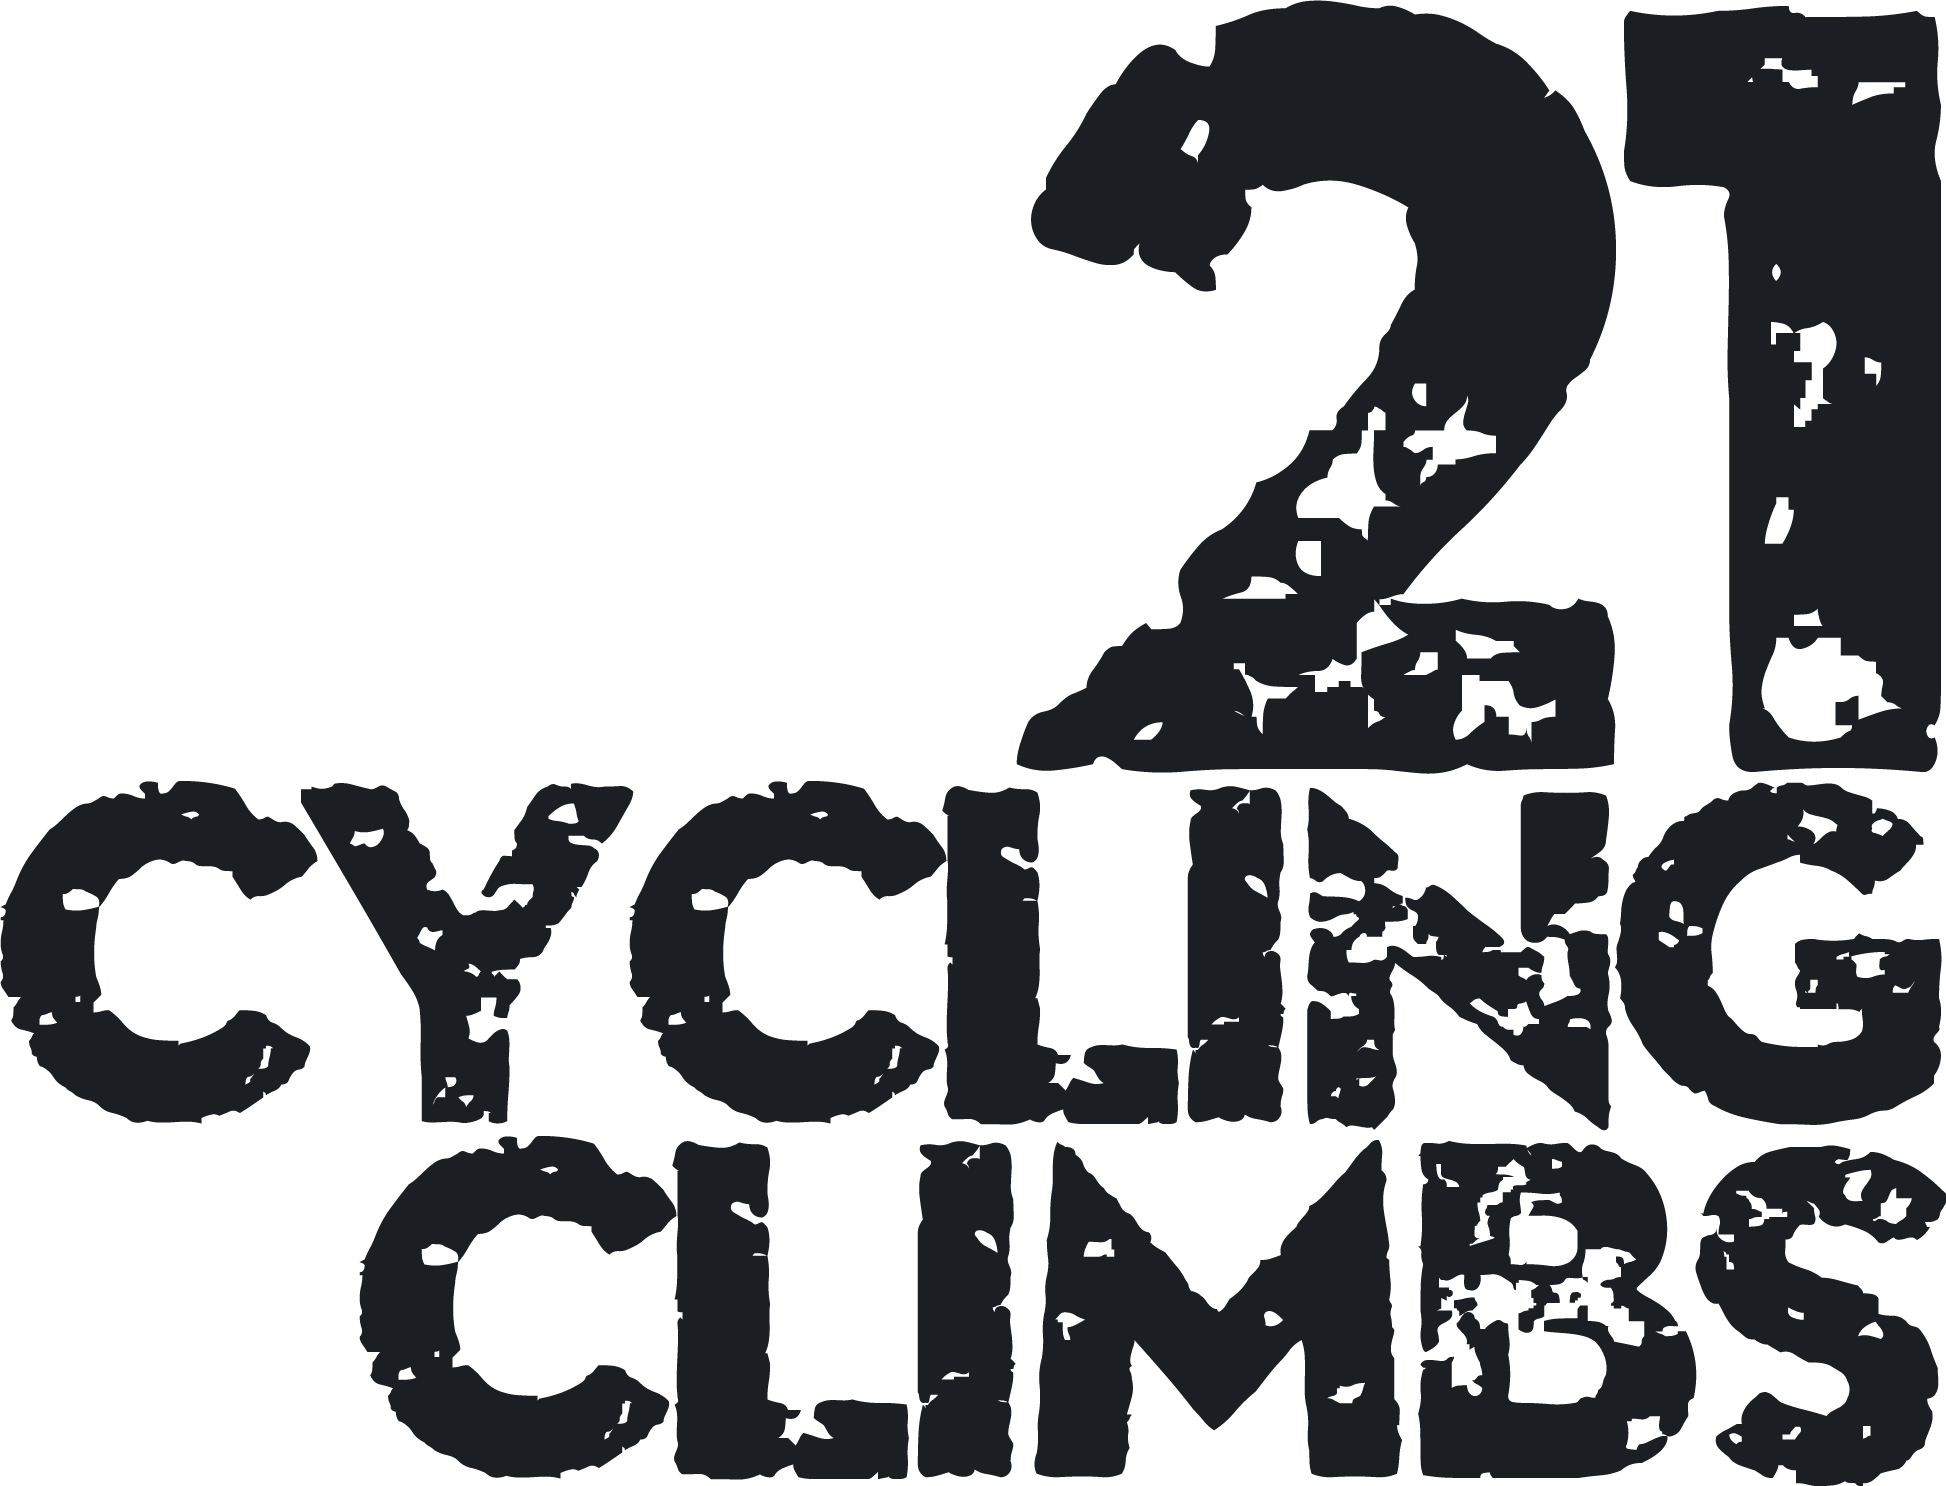 21 cycling climbs a gift for cyclists by davidt